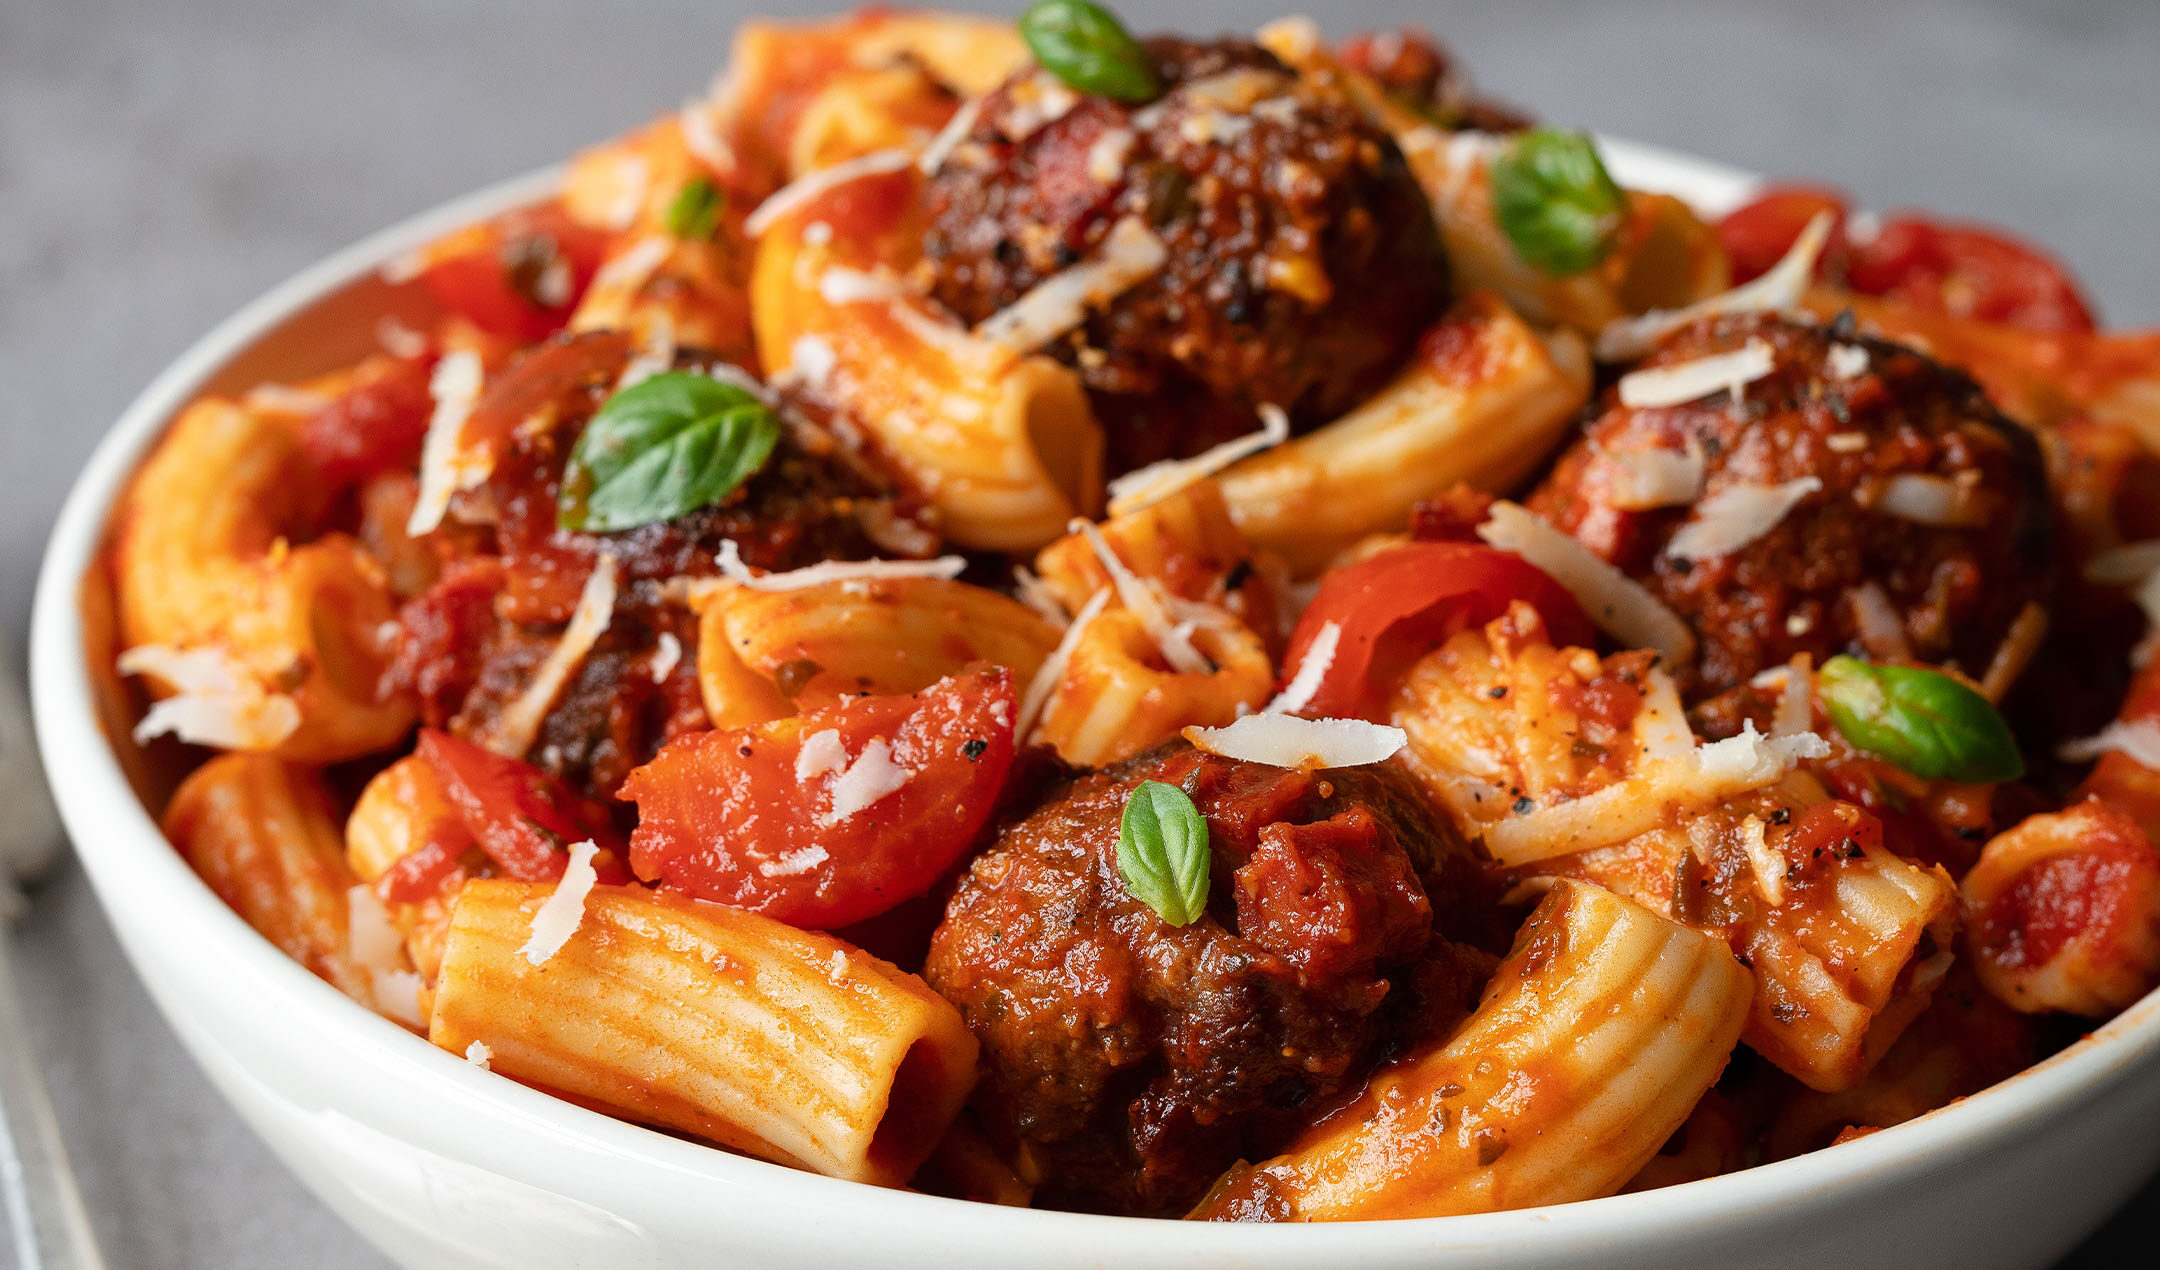 https://easyfood.ie/wp-content/uploads/2023/01/slow-cooked-chorizo-meatballs_banner-image-2160x1270.jpg